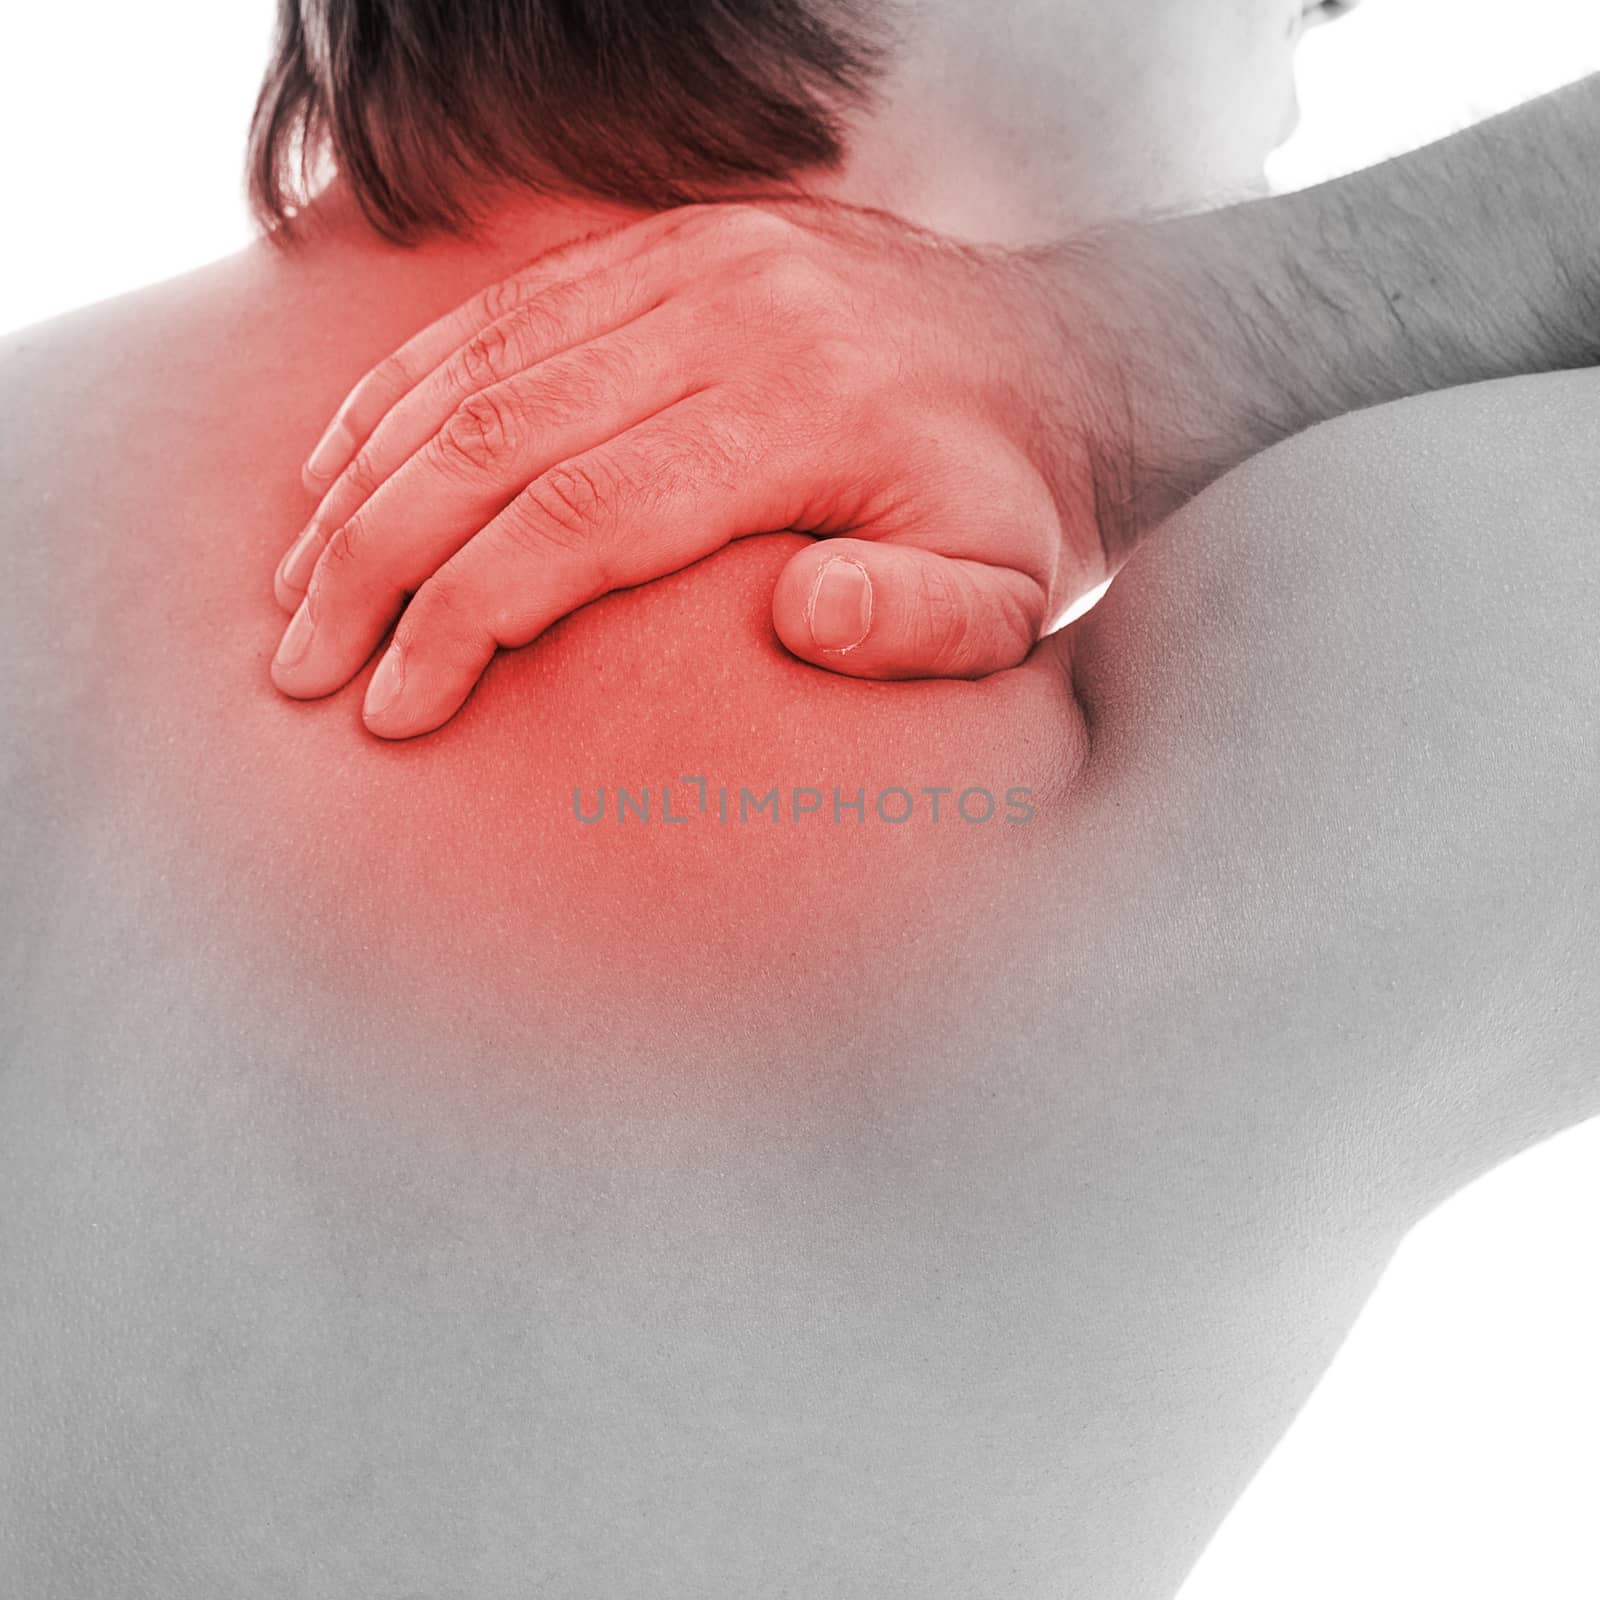 Man is touching his back because it aches